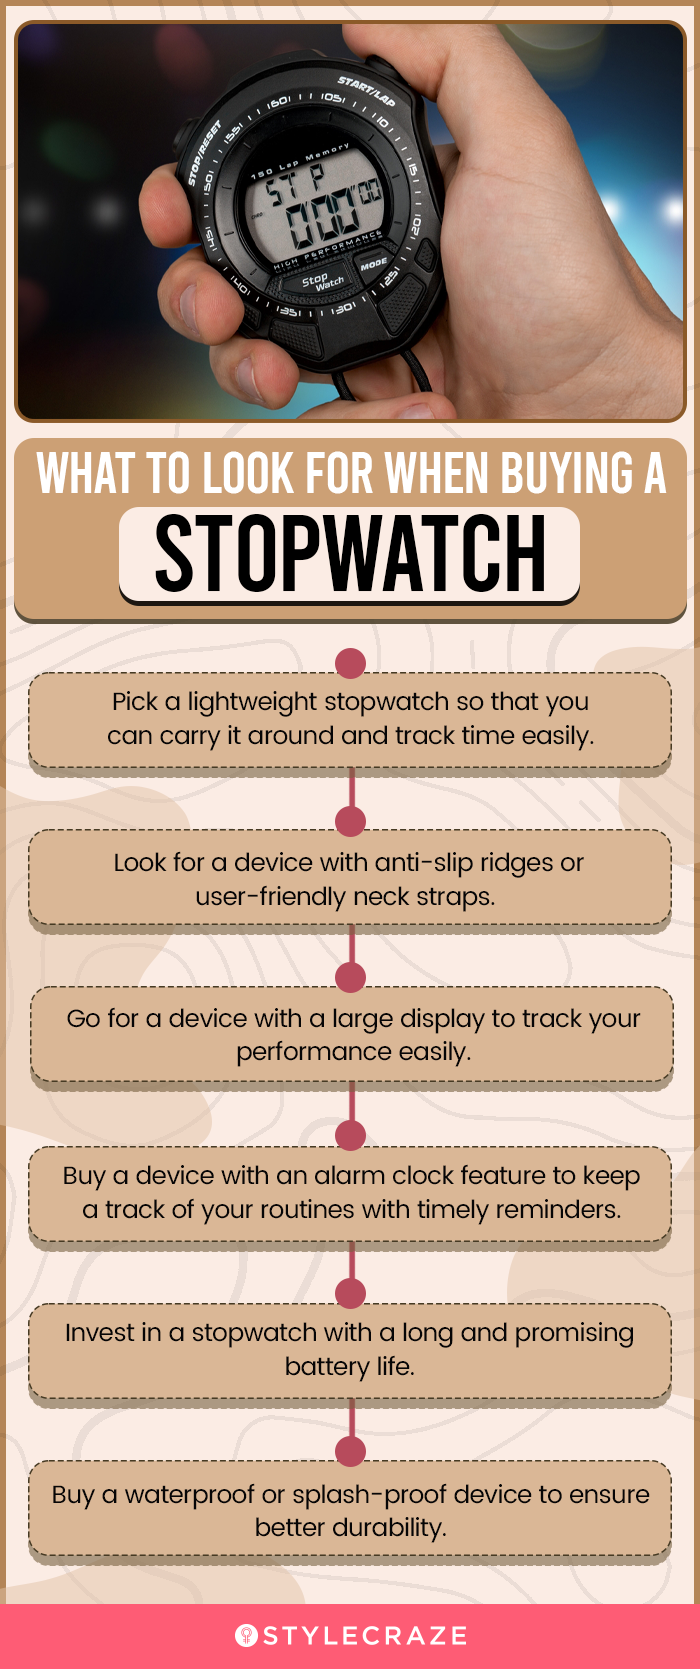 What To Look For When Buying A Stopwatch (infographic)